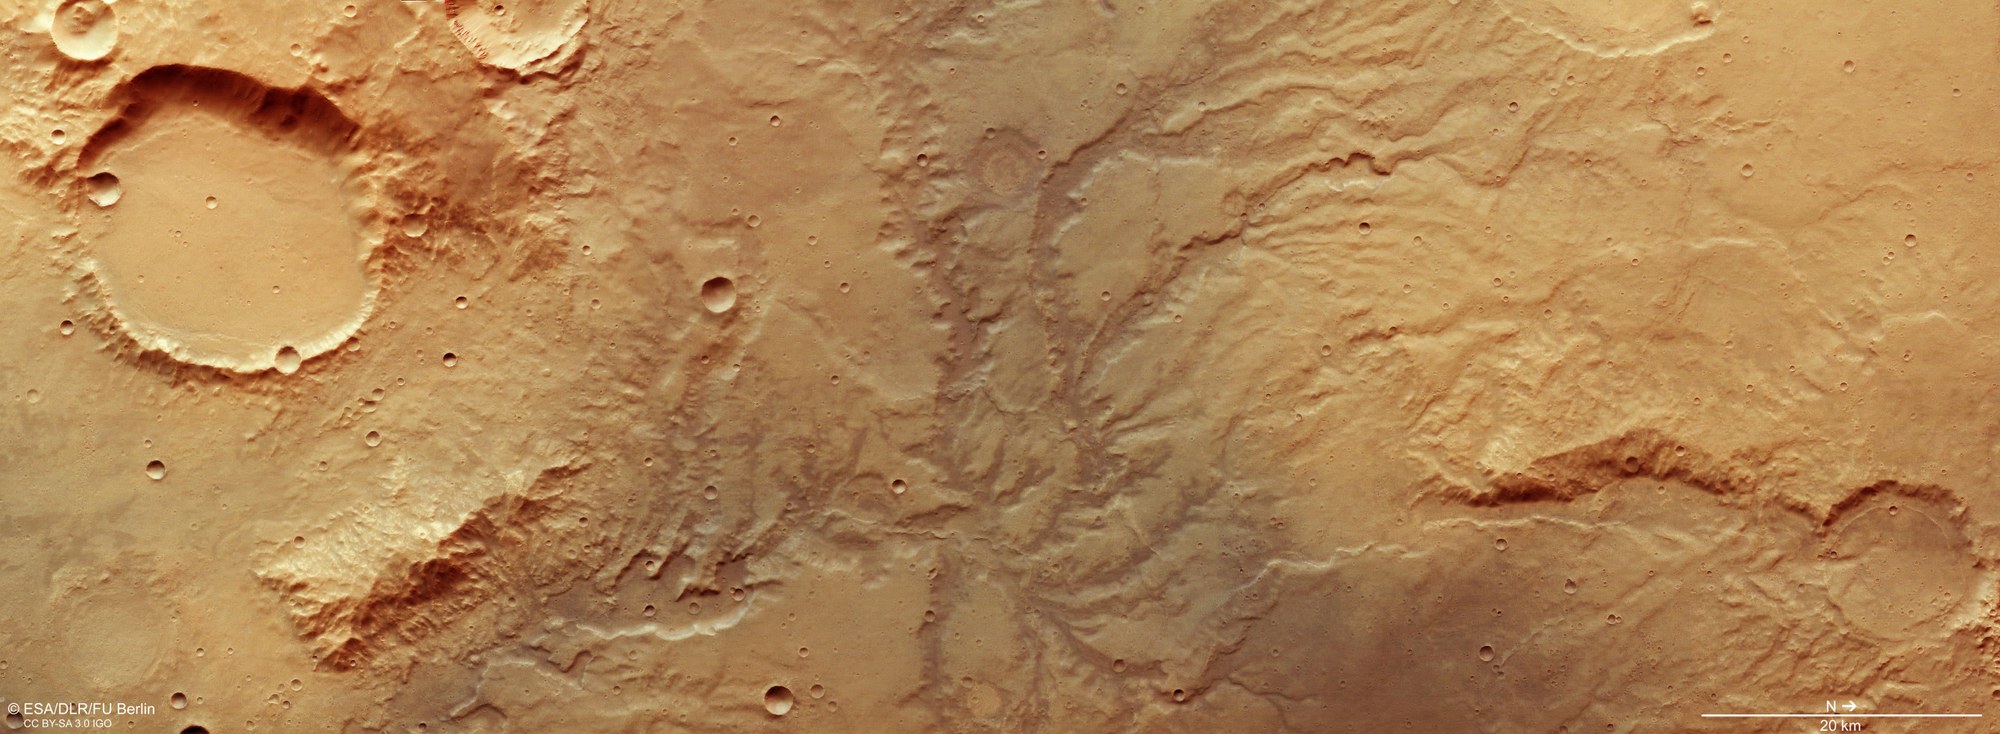 View of a heavily dendritic valley network on Mars